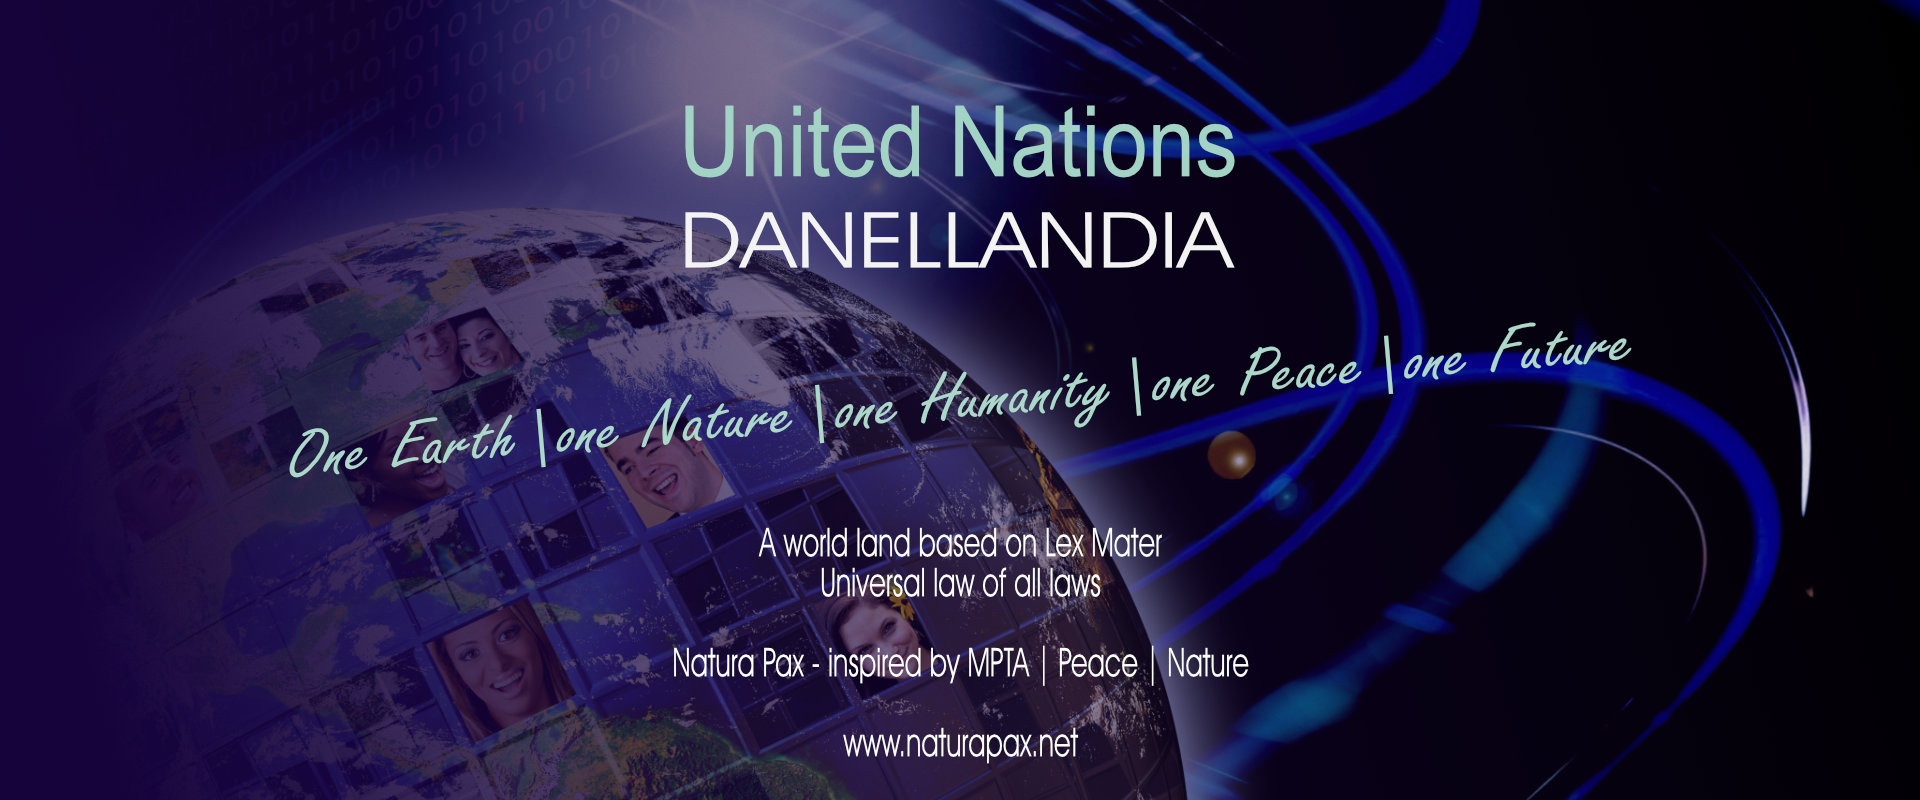 Call to United Nations